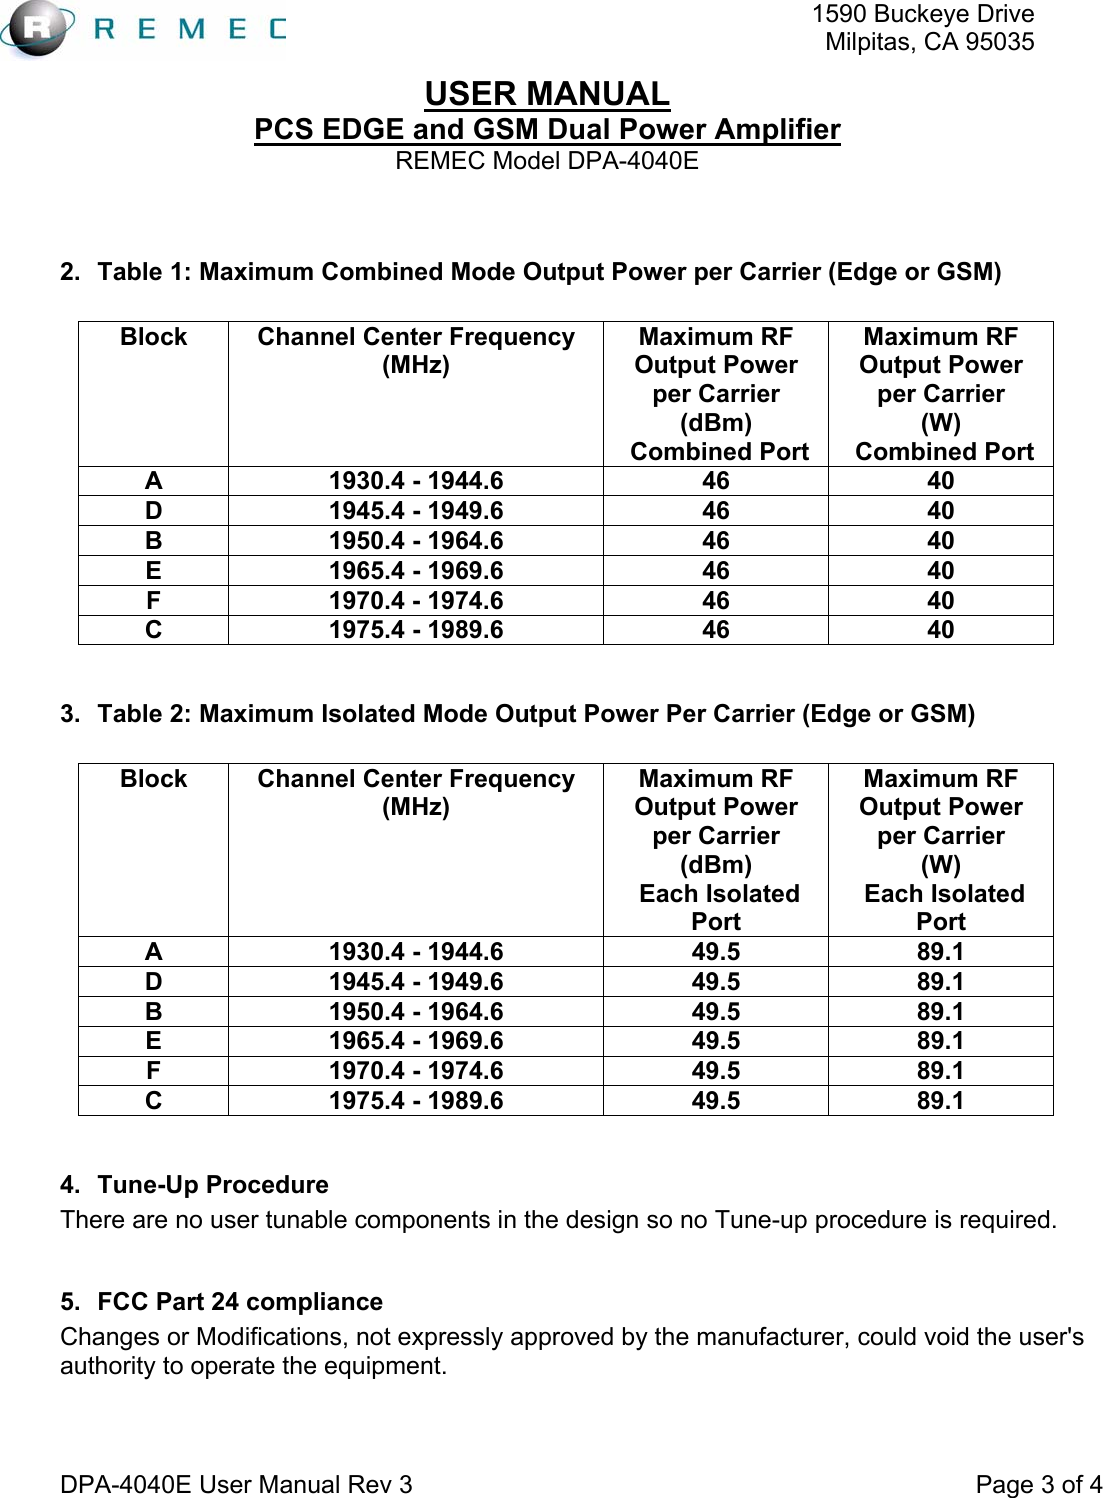   1590 Buckeye DriveMilpitas, CA 95035USER MANUAL PCS EDGE and GSM Dual Power Amplifier REMEC Model DPA-4040E  DPA-4040E User Manual Rev 3                                                                                 Page 3 of 4  2.  Table 1: Maximum Combined Mode Output Power per Carrier (Edge or GSM)  Block  Channel Center Frequency (MHz)  Maximum RF Output Power per Carrier (dBm)  Combined Port Maximum RF Output Power per Carrier (W)  Combined Port A  1930.4 - 1944.6  46  40 D  1945.4 - 1949.6  46  40 B  1950.4 - 1964.6  46  40 E  1965.4 - 1969.6  46  40 F  1970.4 - 1974.6  46  40 C  1975.4 - 1989.6  46  40  3.  Table 2: Maximum Isolated Mode Output Power Per Carrier (Edge or GSM)  Block  Channel Center Frequency (MHz)  Maximum RF Output Power per Carrier (dBm)  Each Isolated Port Maximum RF Output Power per Carrier (W)  Each Isolated Port A  1930.4 - 1944.6  49.5  89.1 D  1945.4 - 1949.6  49.5  89.1 B  1950.4 - 1964.6  49.5  89.1 E  1965.4 - 1969.6  49.5  89.1 F  1970.4 - 1974.6  49.5  89.1 C  1975.4 - 1989.6  49.5  89.1  4. Tune-Up Procedure There are no user tunable components in the design so no Tune-up procedure is required.  5.  FCC Part 24 compliance Changes or Modifications, not expressly approved by the manufacturer, could void the user&apos;s authority to operate the equipment.  